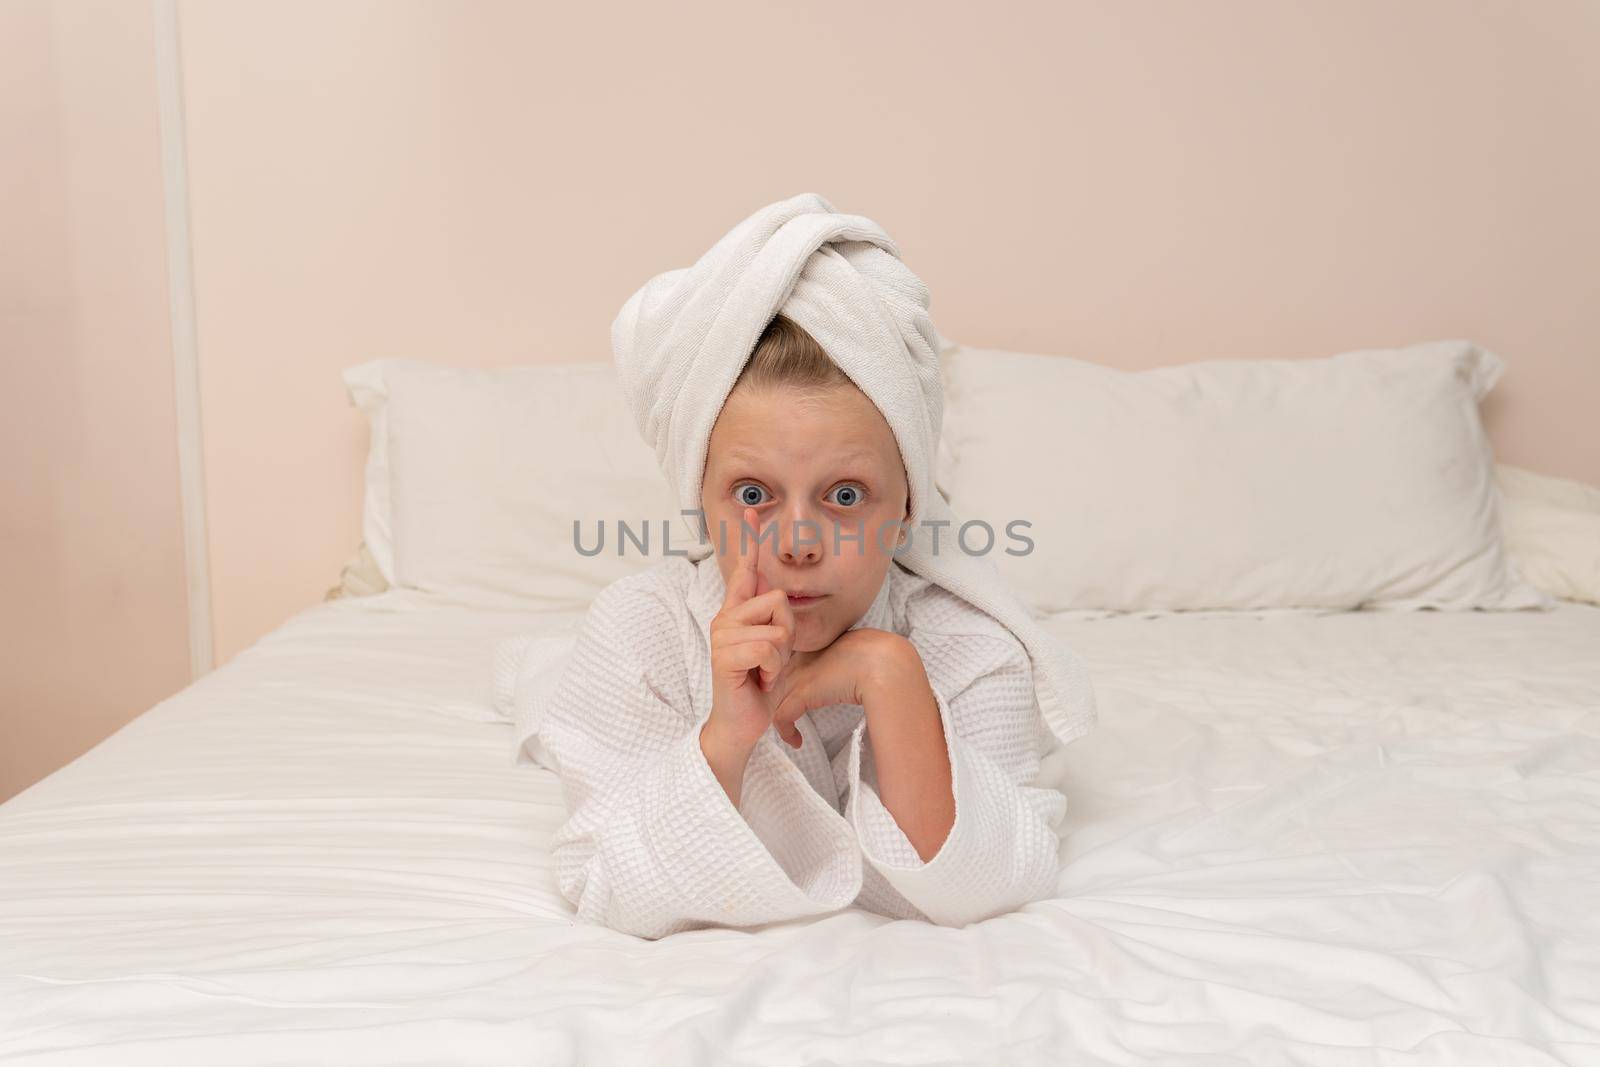 Elbows Creek coffee bathrobe copyspace smile bed girl white morning, concept woman pretty from shower from caucasian style, towel baby. Hair funny female, comfort